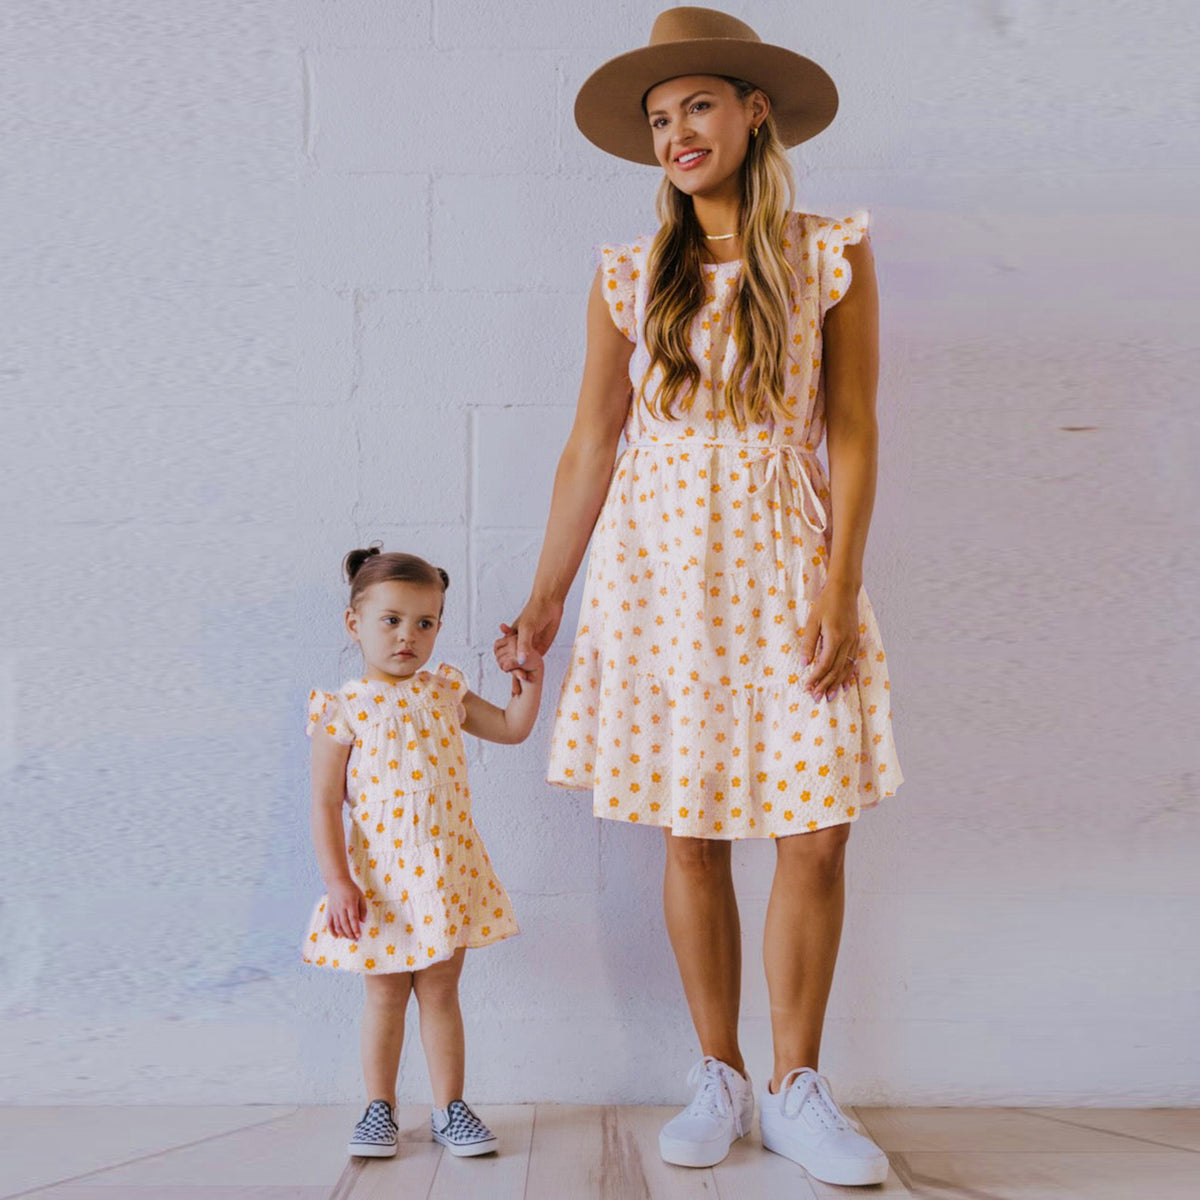 Mommy And Me Kid Flower Print Dresses Wholesale 230403243